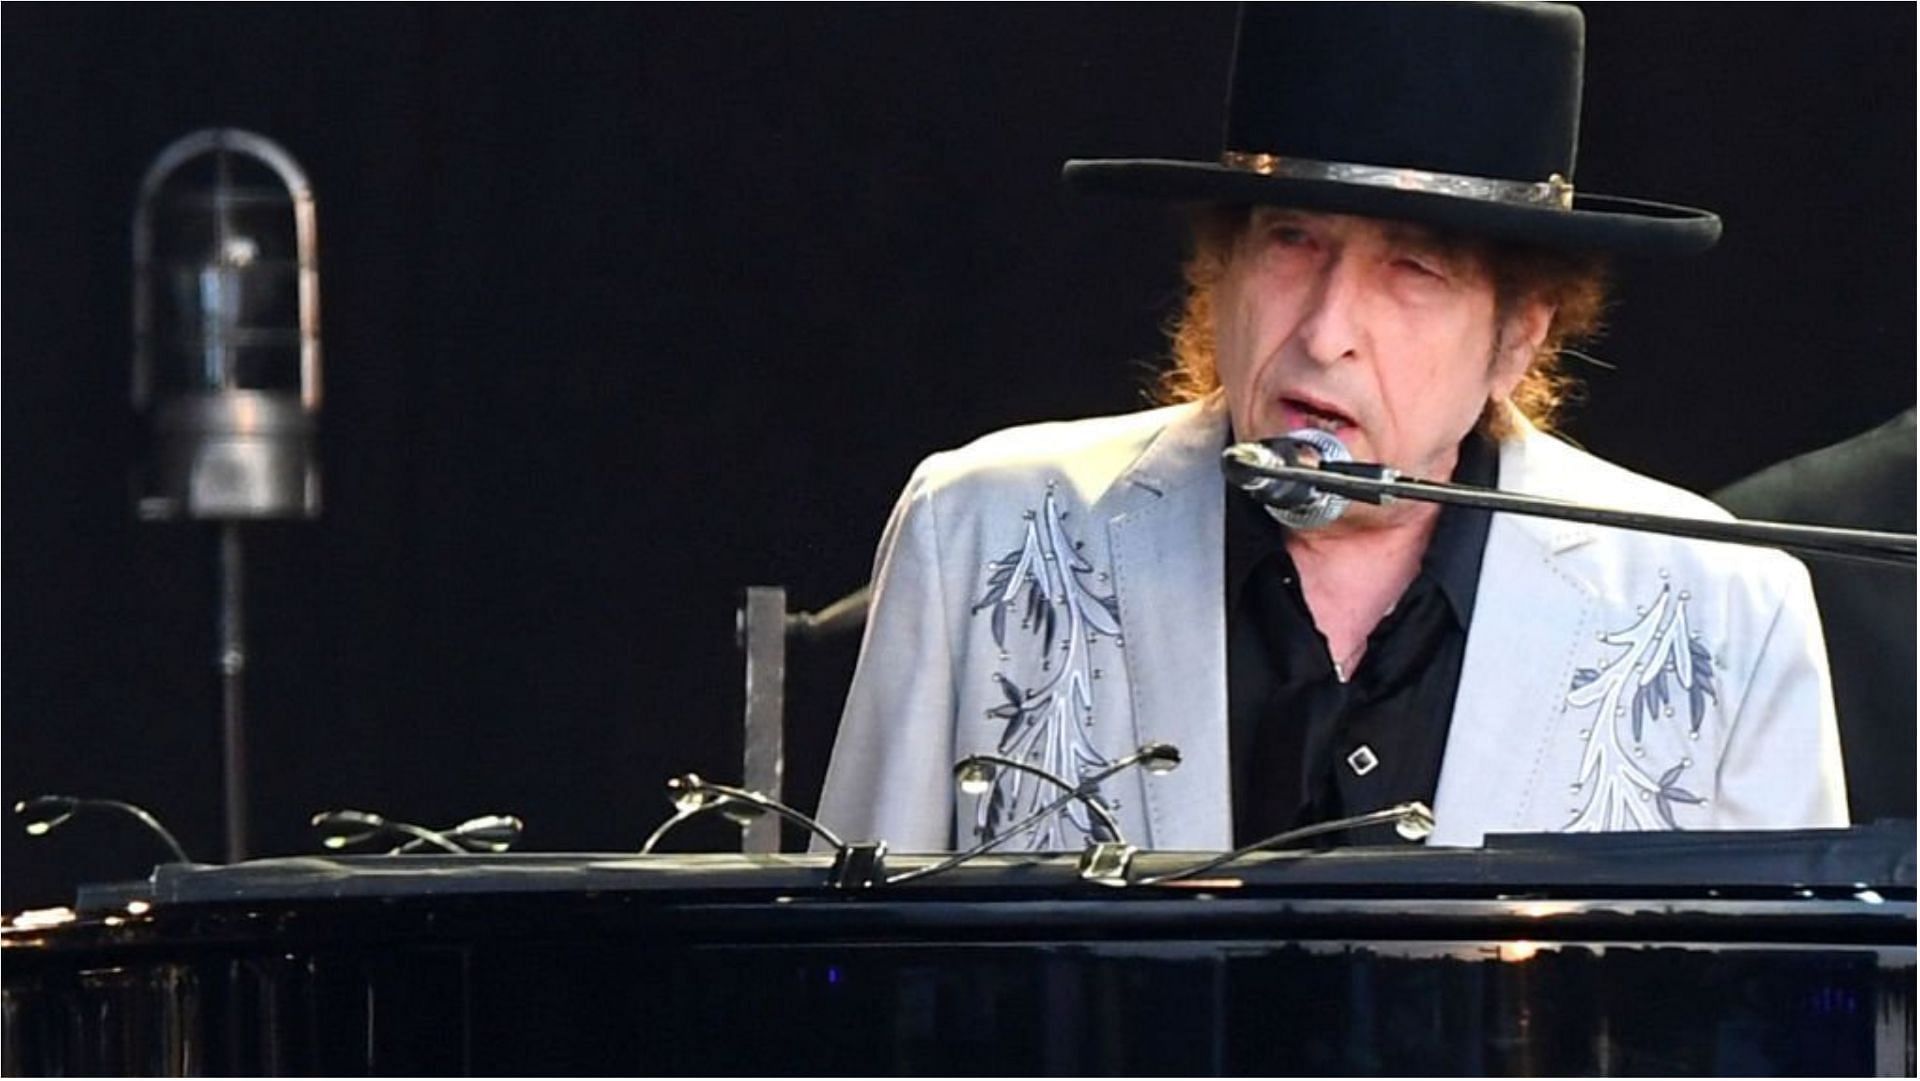 Bob Dylan apologized for the use of autopen in the limited edition of his book (Image via Dave J Hogan/Getty Images)